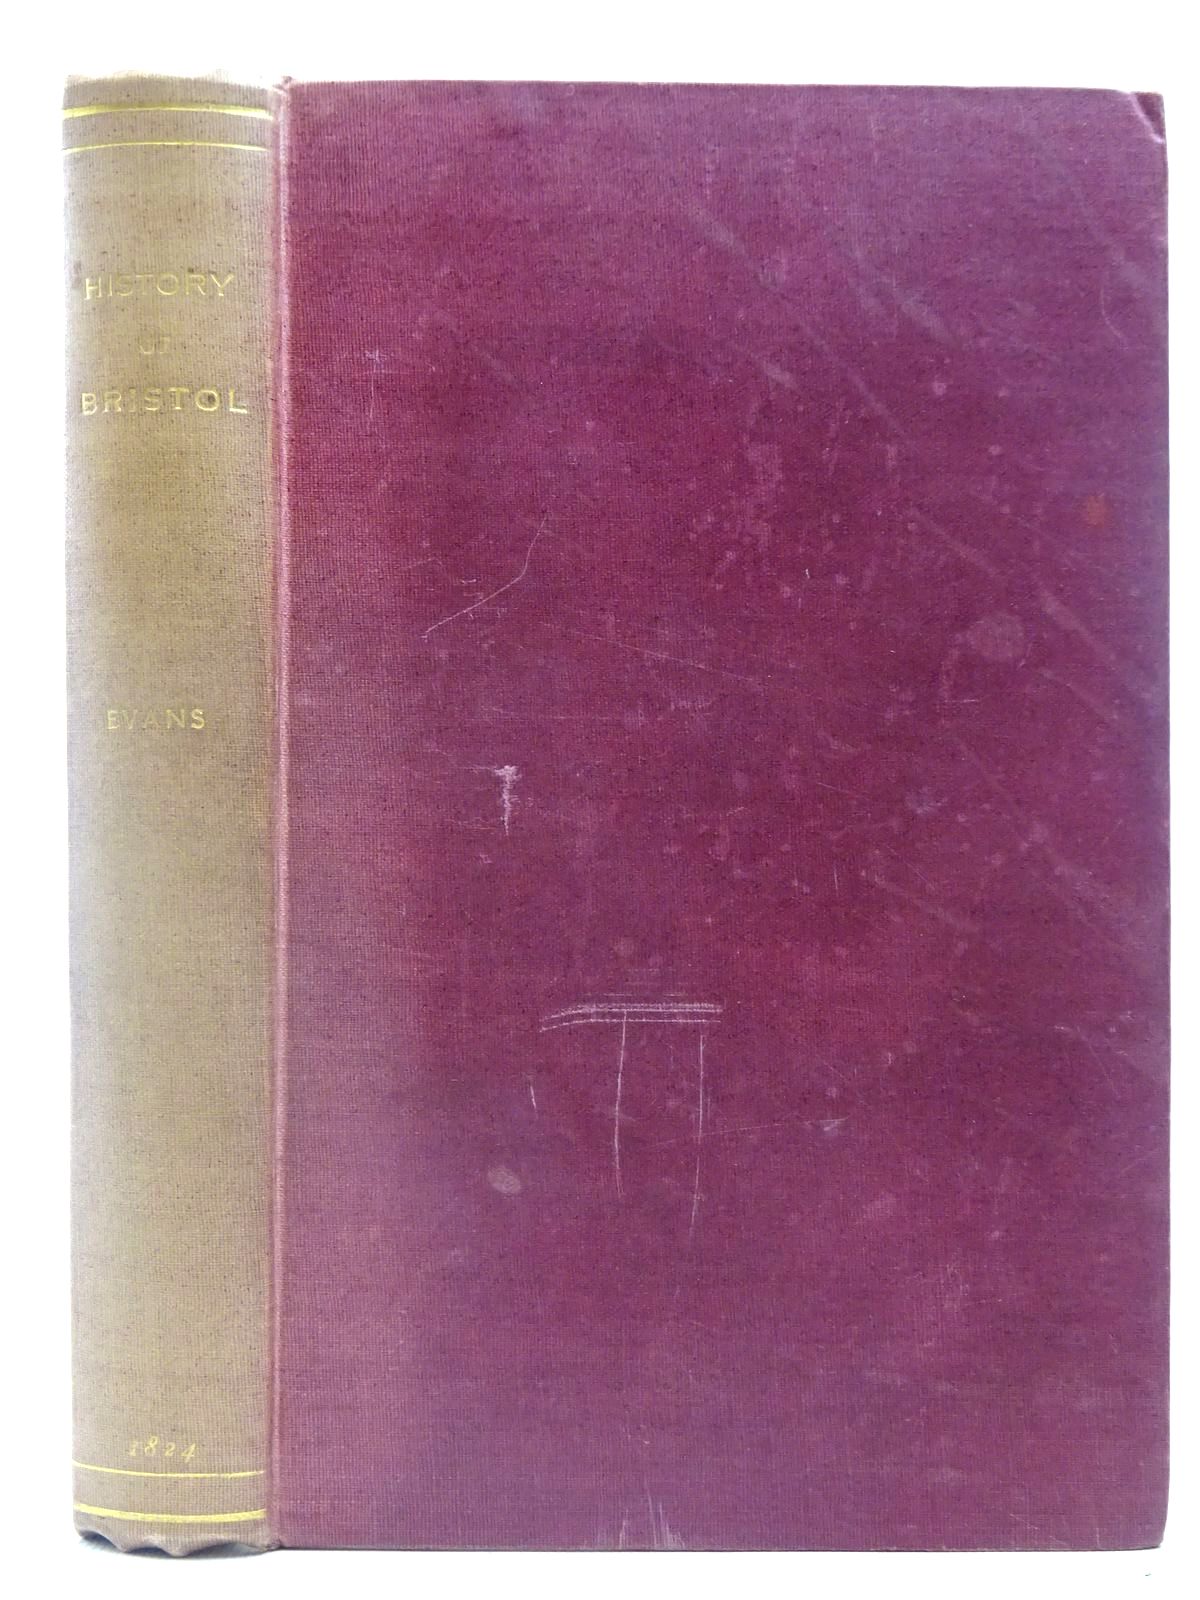 Photo of A CHRONOLOGICAL OUTLINE OF THE HISTORY OF BRISTOL written by Evans, John published by G. And W.B. Whittaker (STOCK CODE: 2127055)  for sale by Stella & Rose's Books